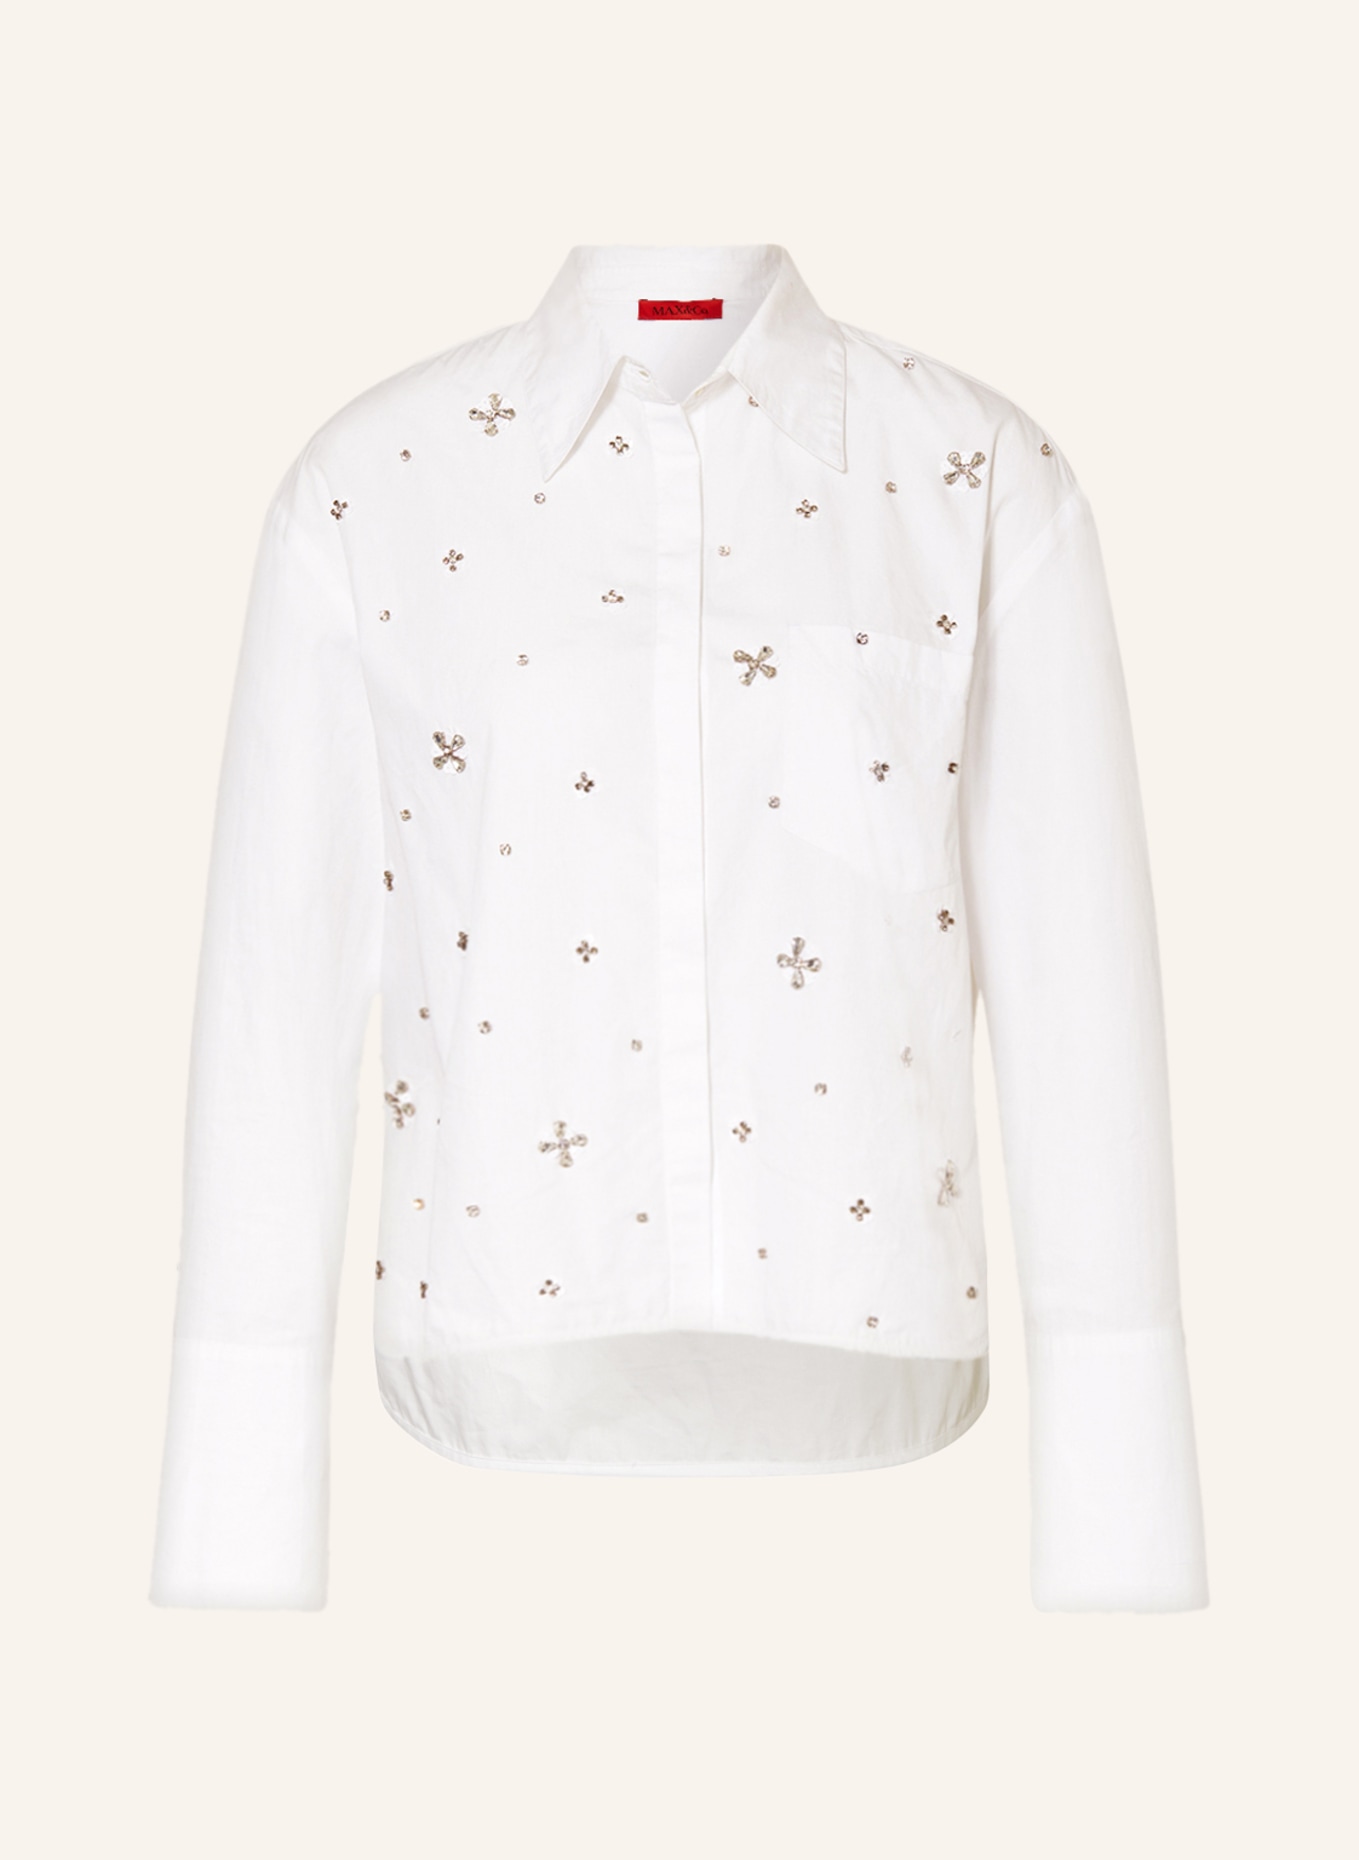 MAX & Co. Shirt blouse SORRISO with sequins and decorative gems, Color: WHITE (Image 1)